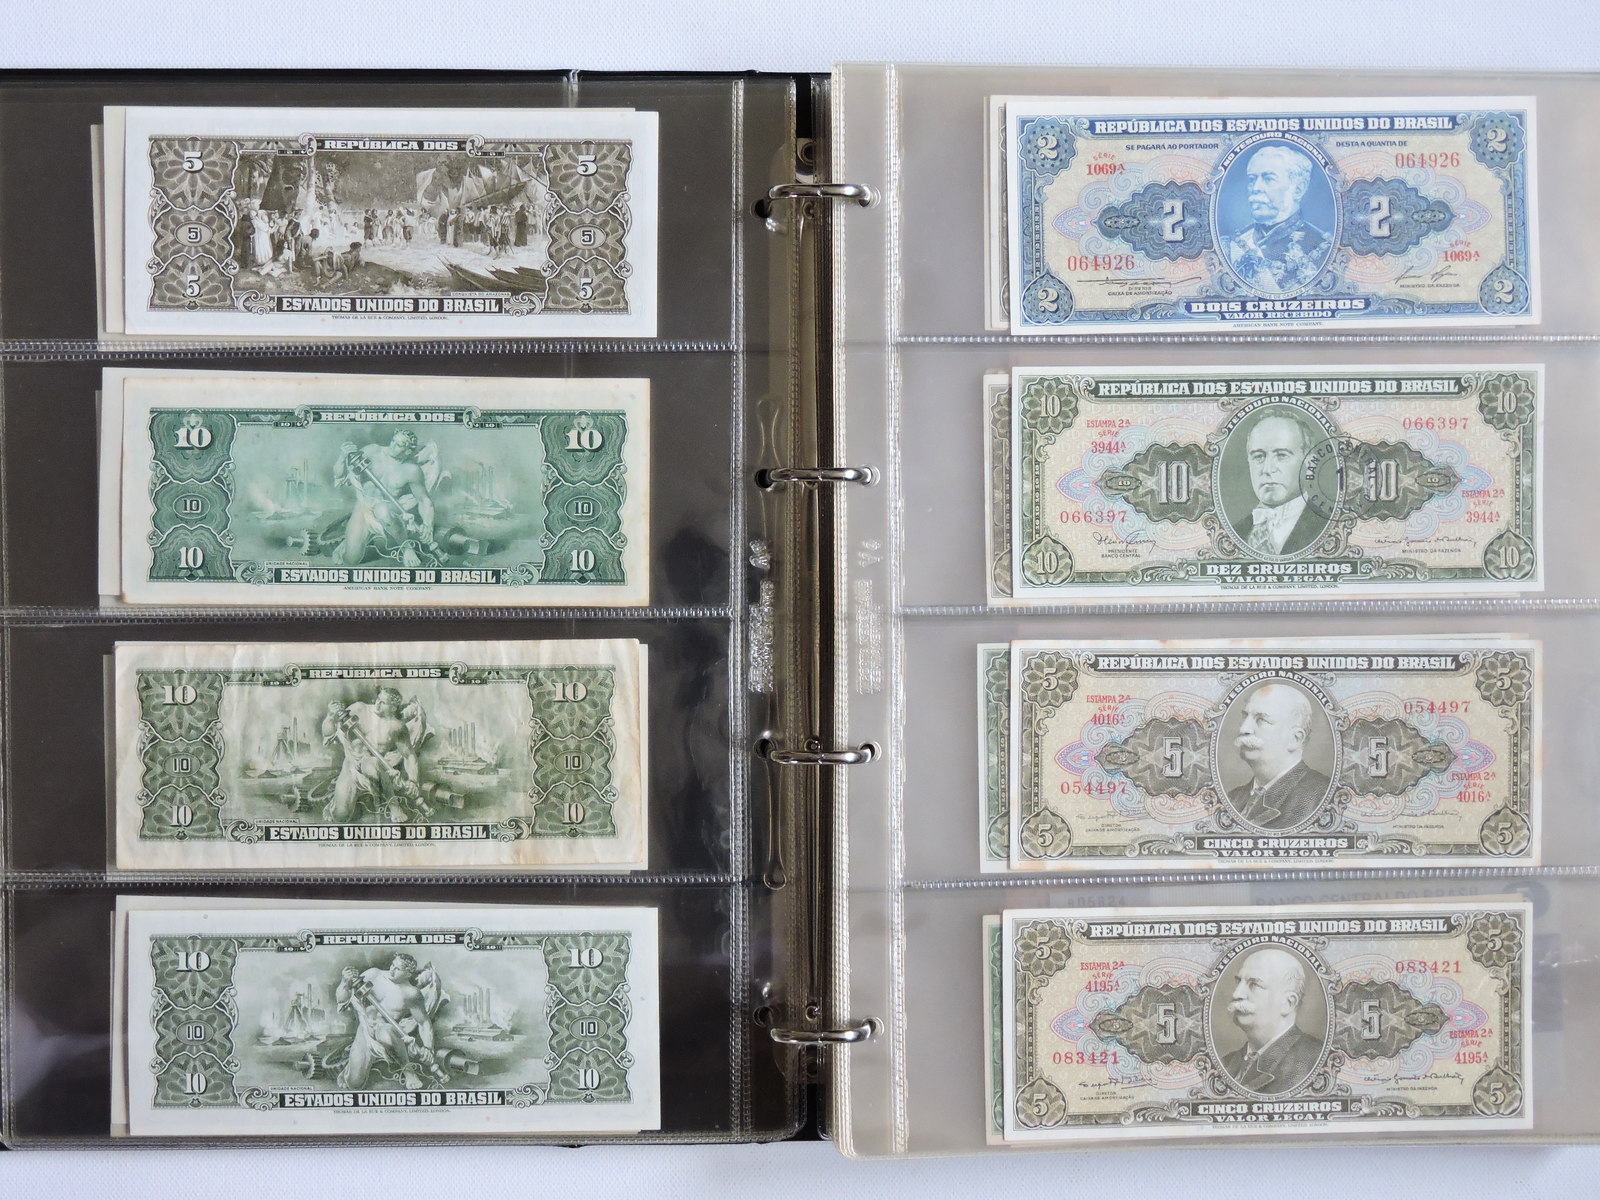 Banknotes, Brazil and Argentina
, page:5, item:1